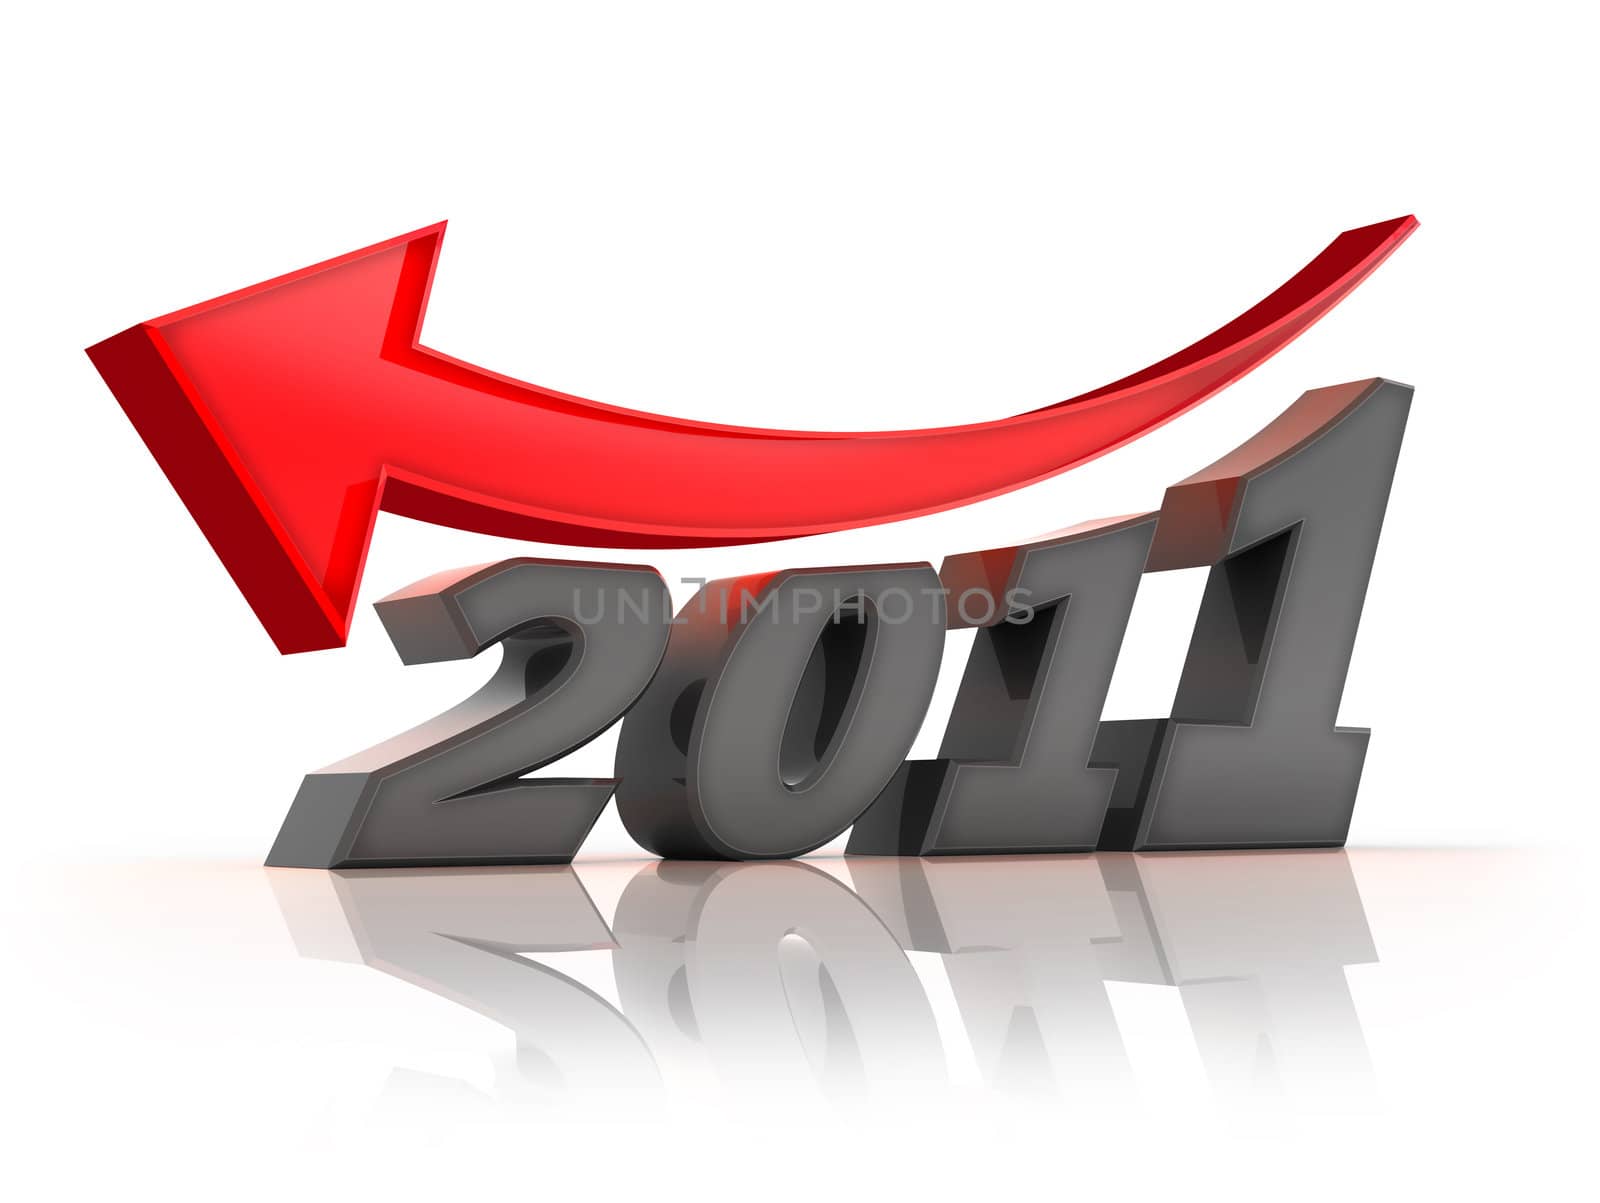 Business fall in 2011. Message of concern over the new year.